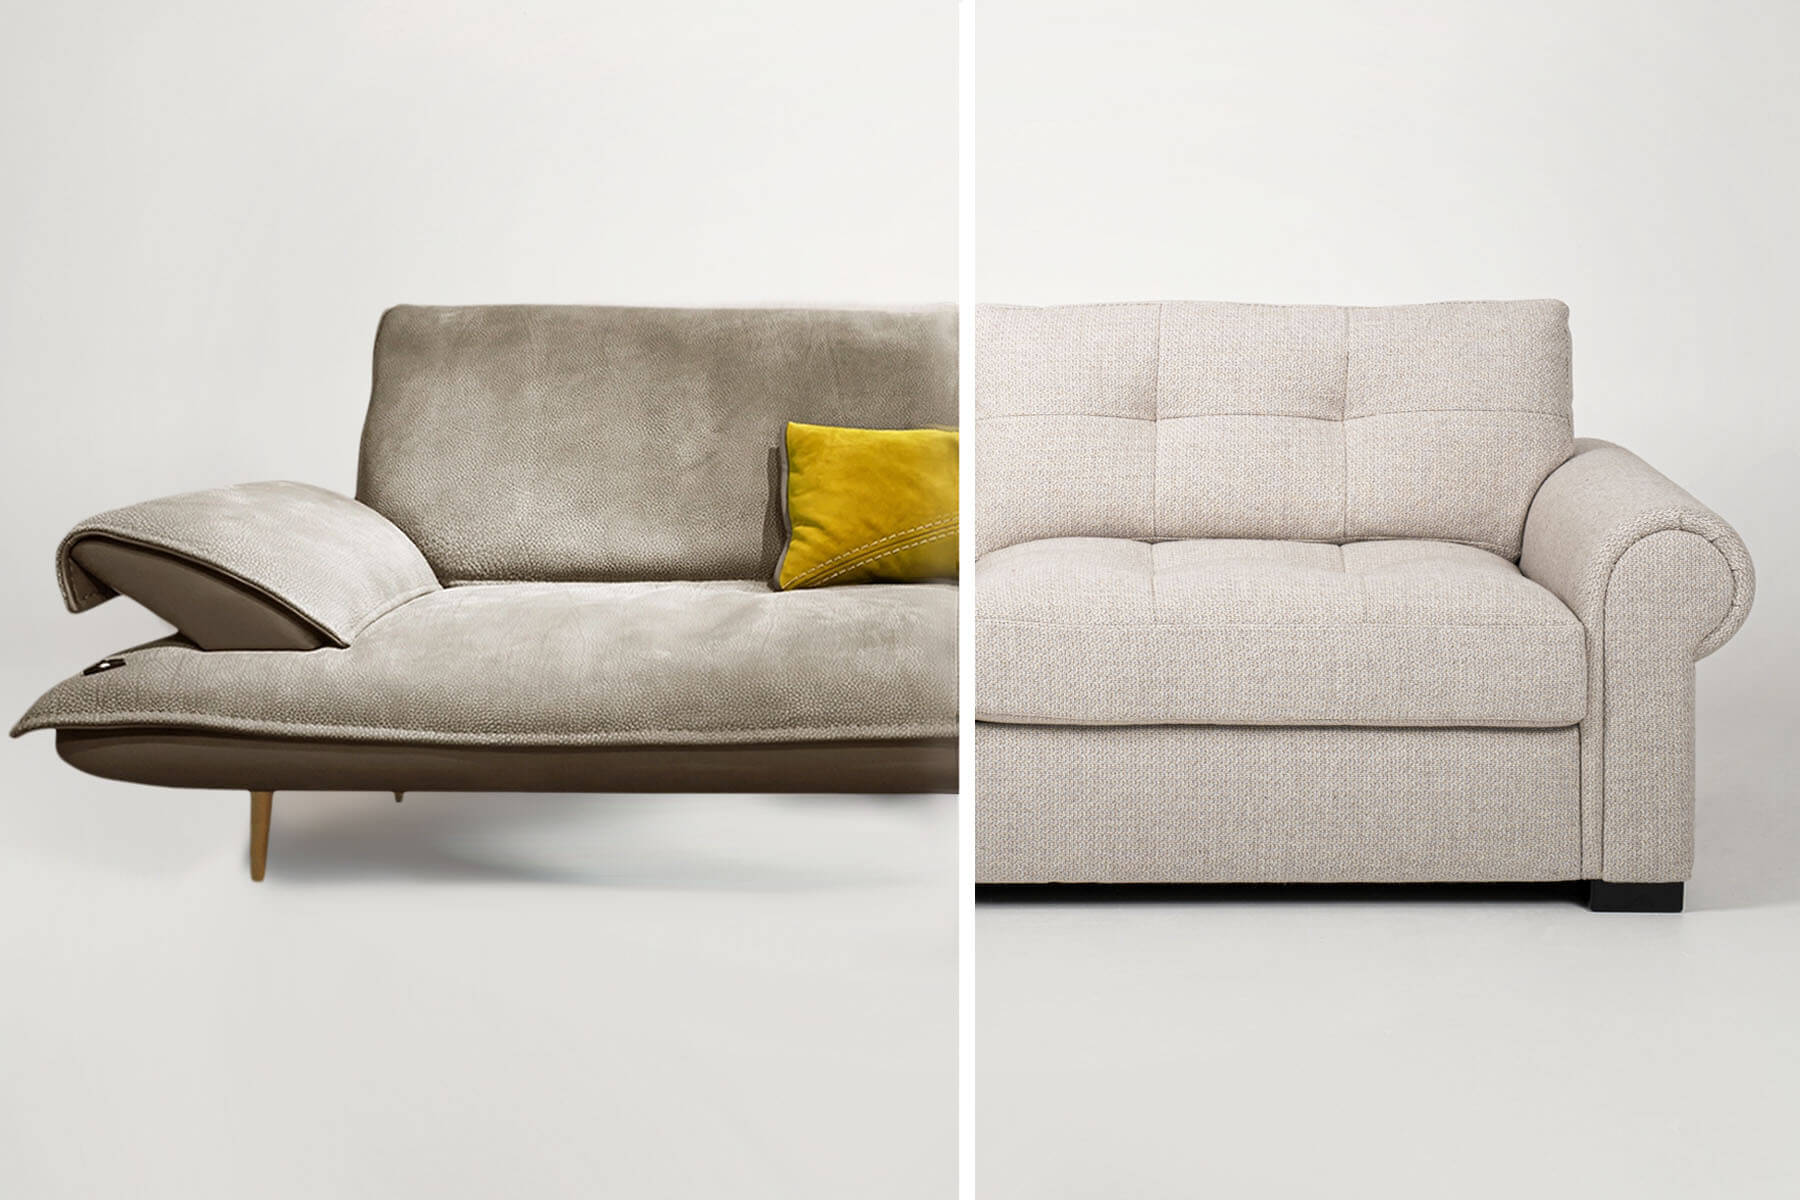 Anekdote module ontspannen The Difference Between Sofa and Couch | San Francisco Design